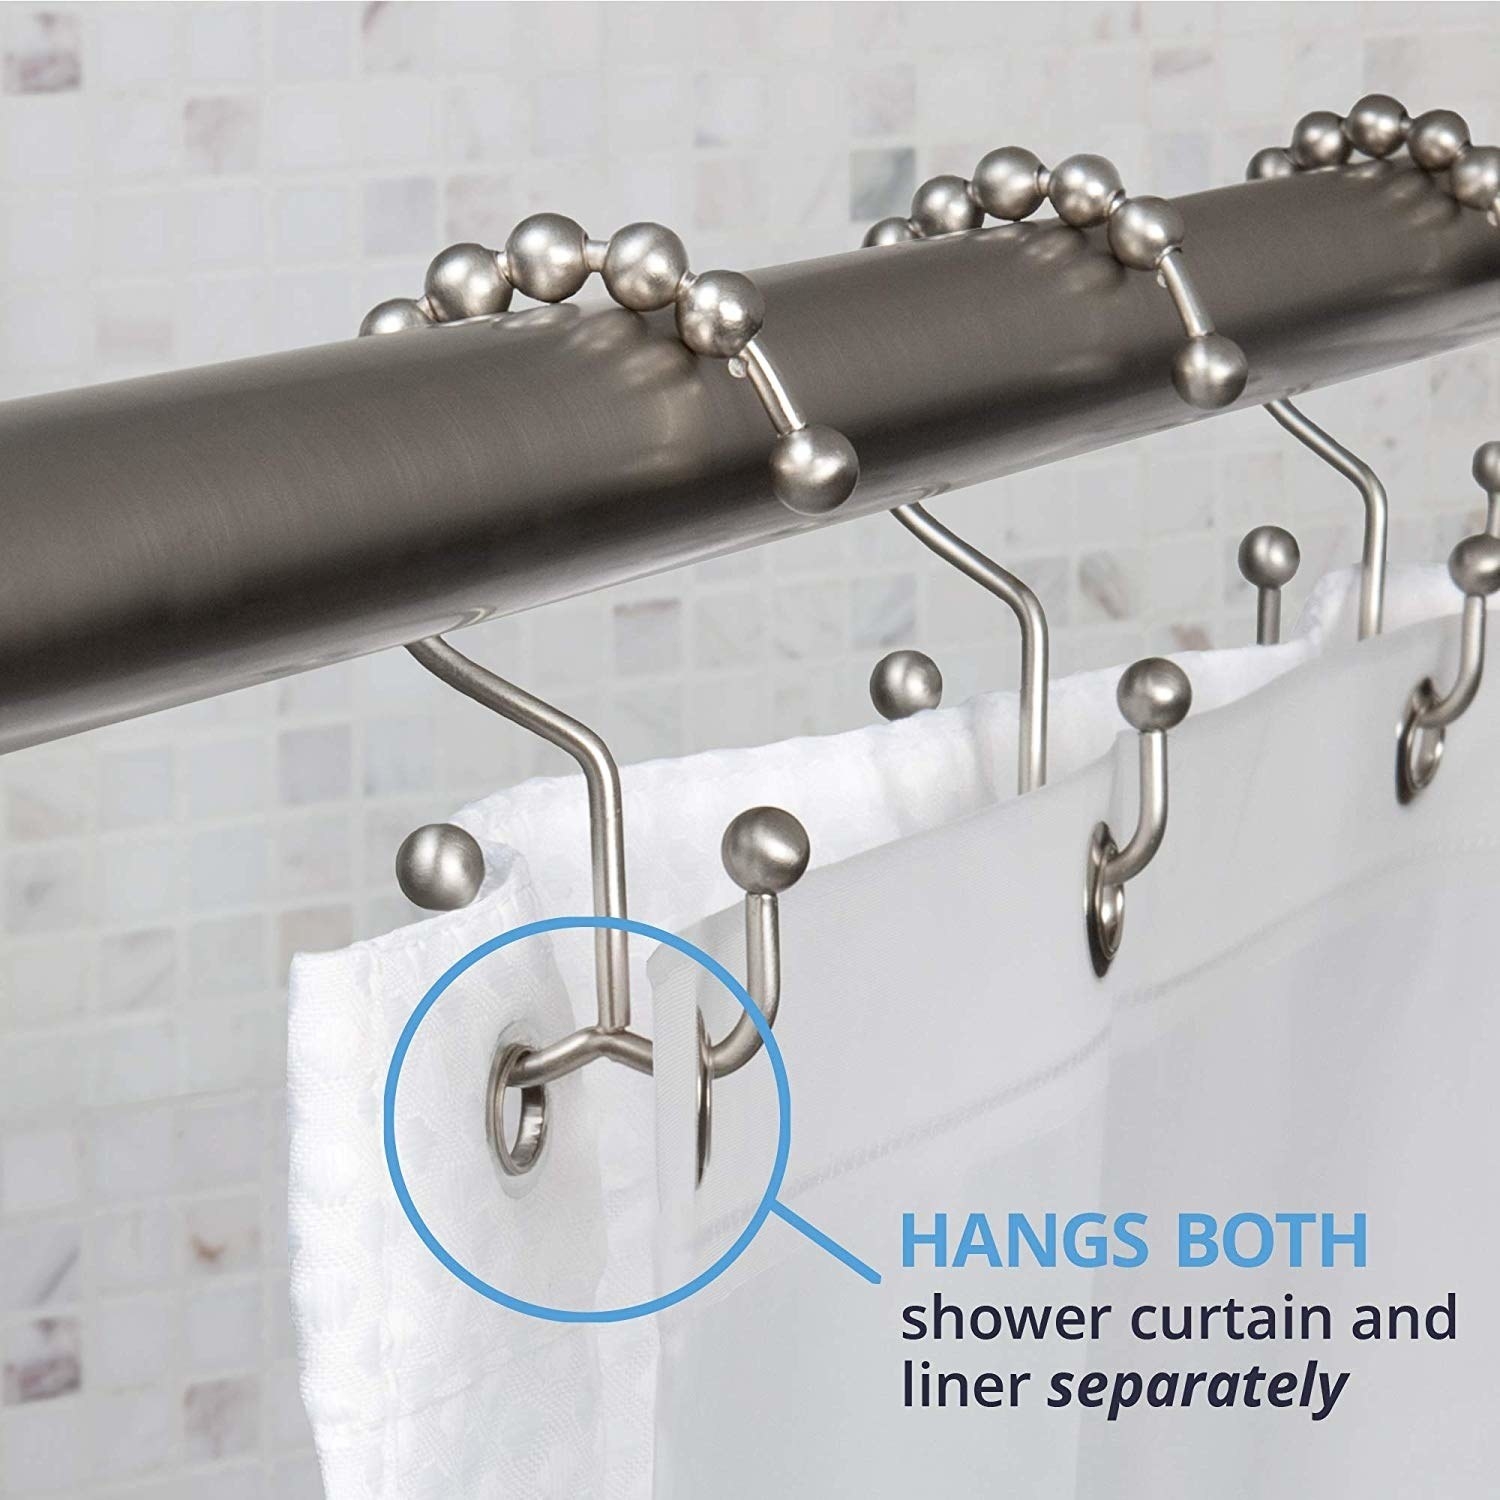 25 Problem Solving Bathroom S, Shower Curtain Hooks Keep Coming Off